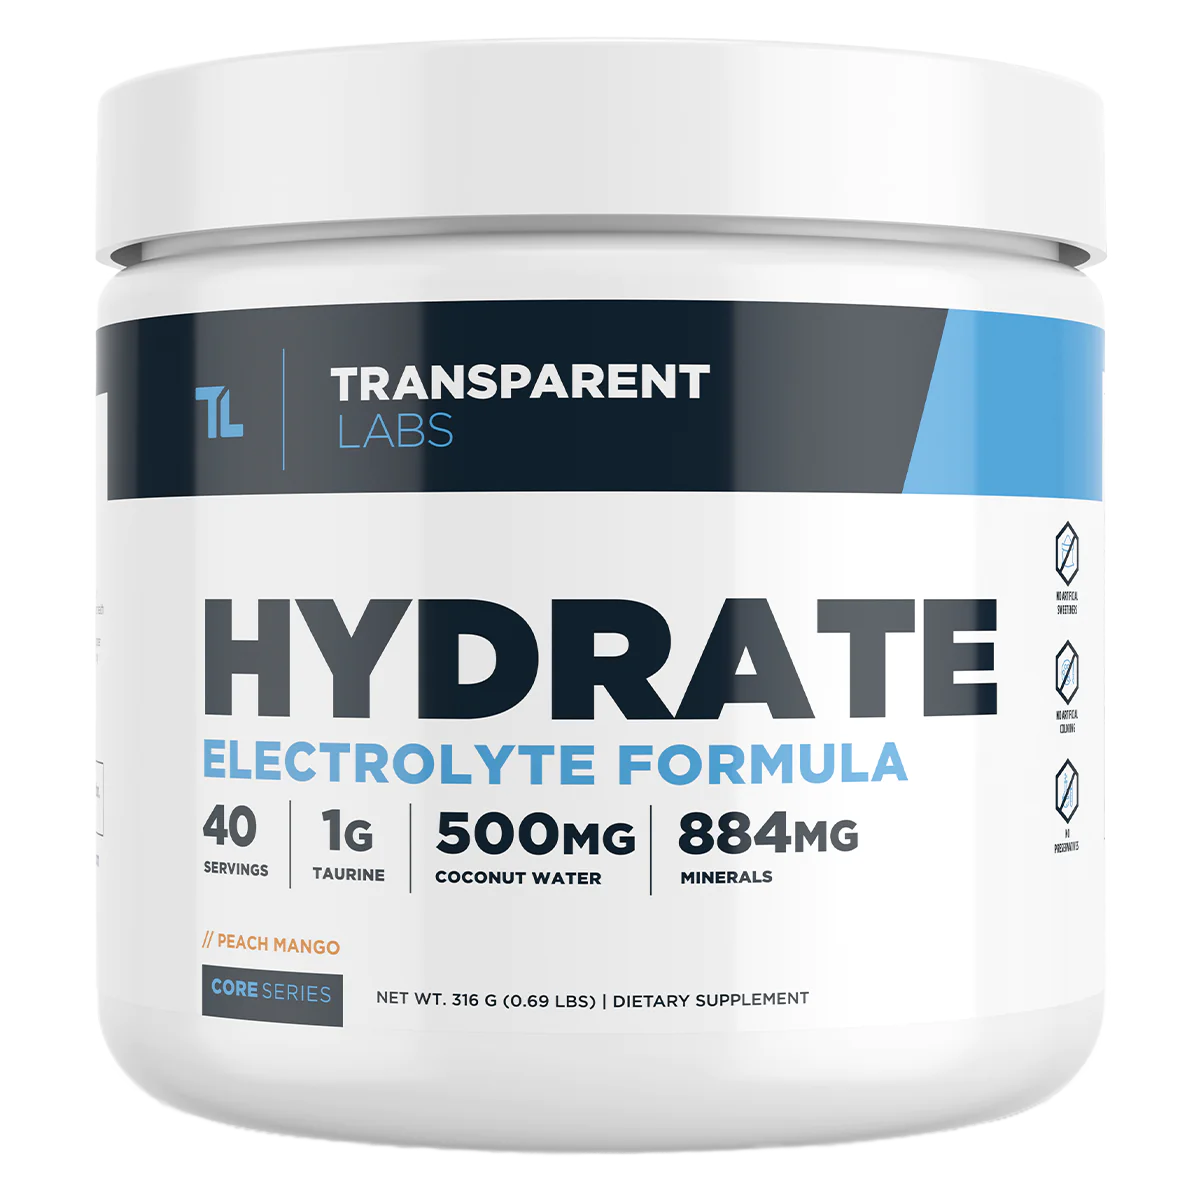 Transparent Labs HYDRATE